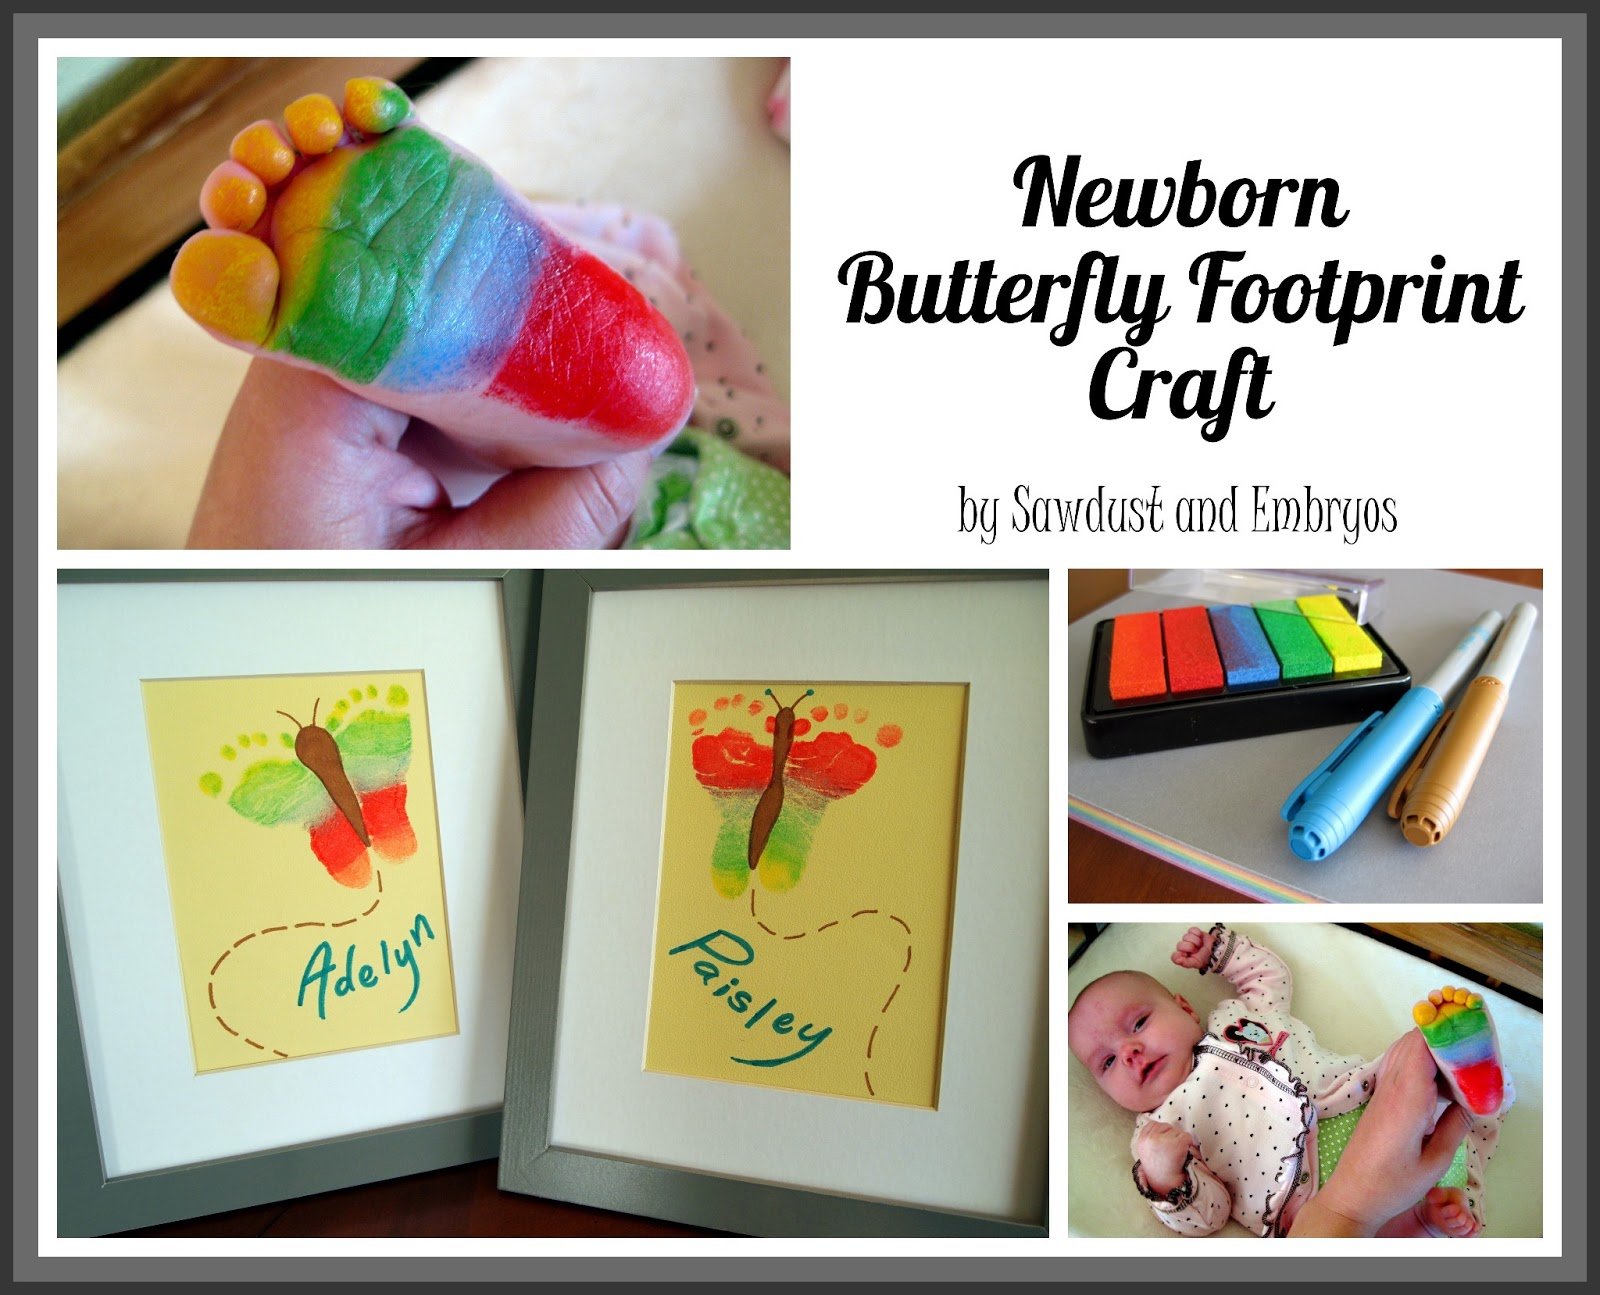 Newborn Footprint keepsake Butterfly Art craft. These would make such a bright and happy present for special family members. #Craft #Keepsake #Butterfly #Footprint